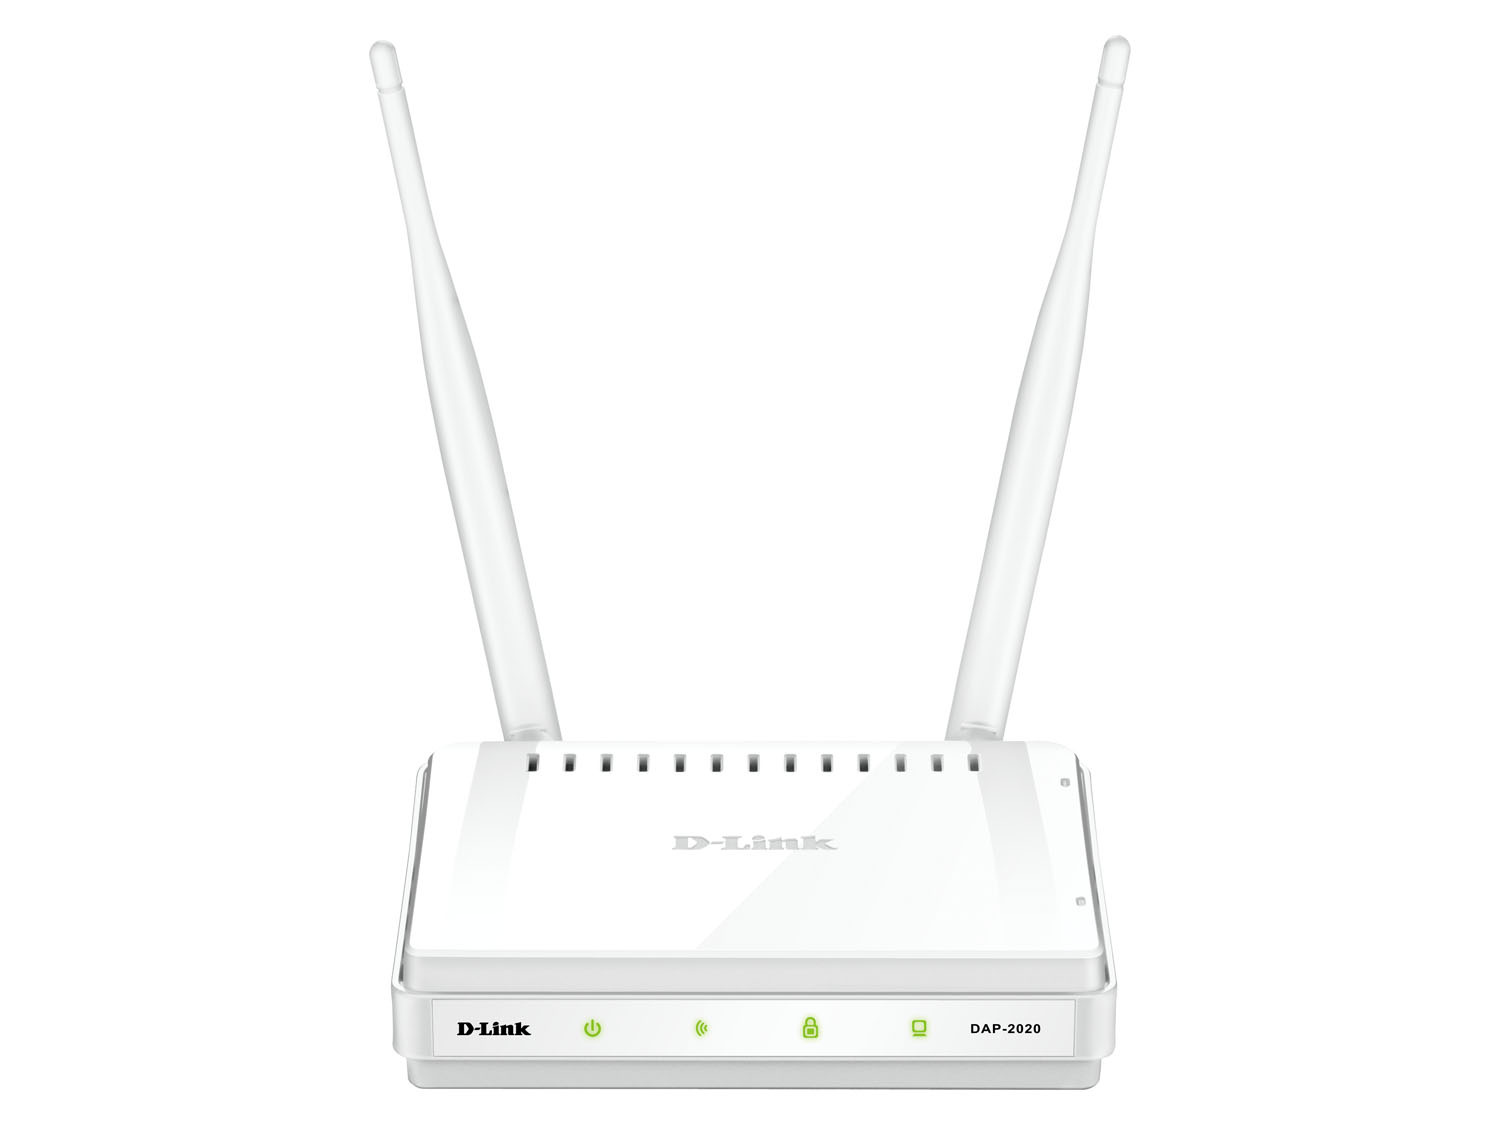 Wireless D-Link N300 Point Access